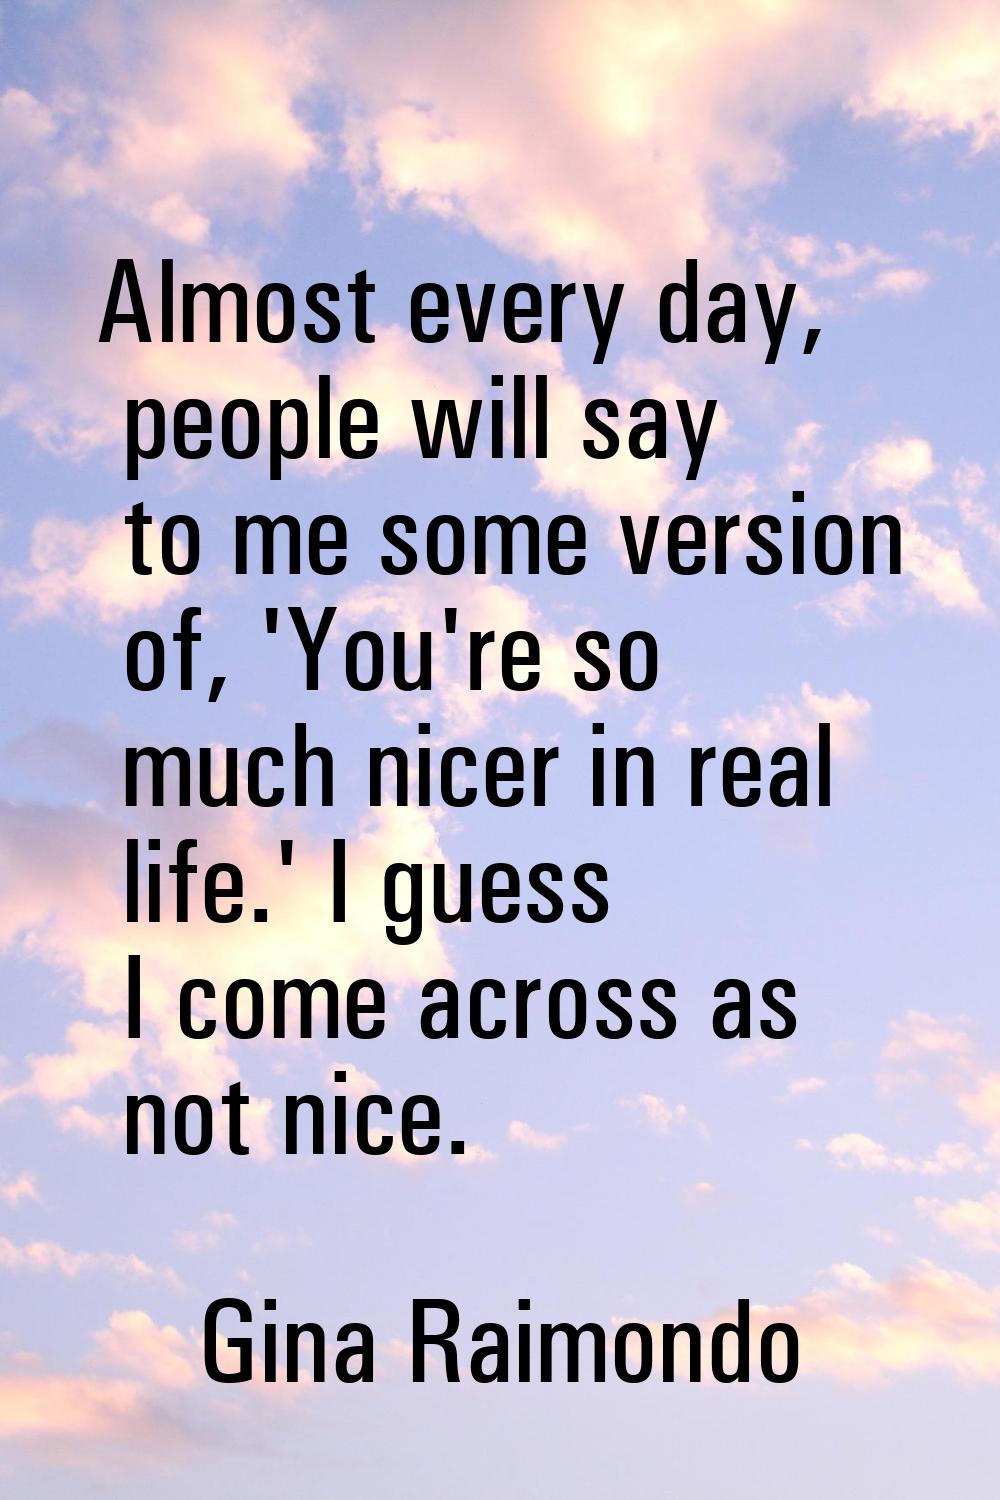 Almost every day, people will say to me some version of, 'You're so much nicer in real life.' I gue